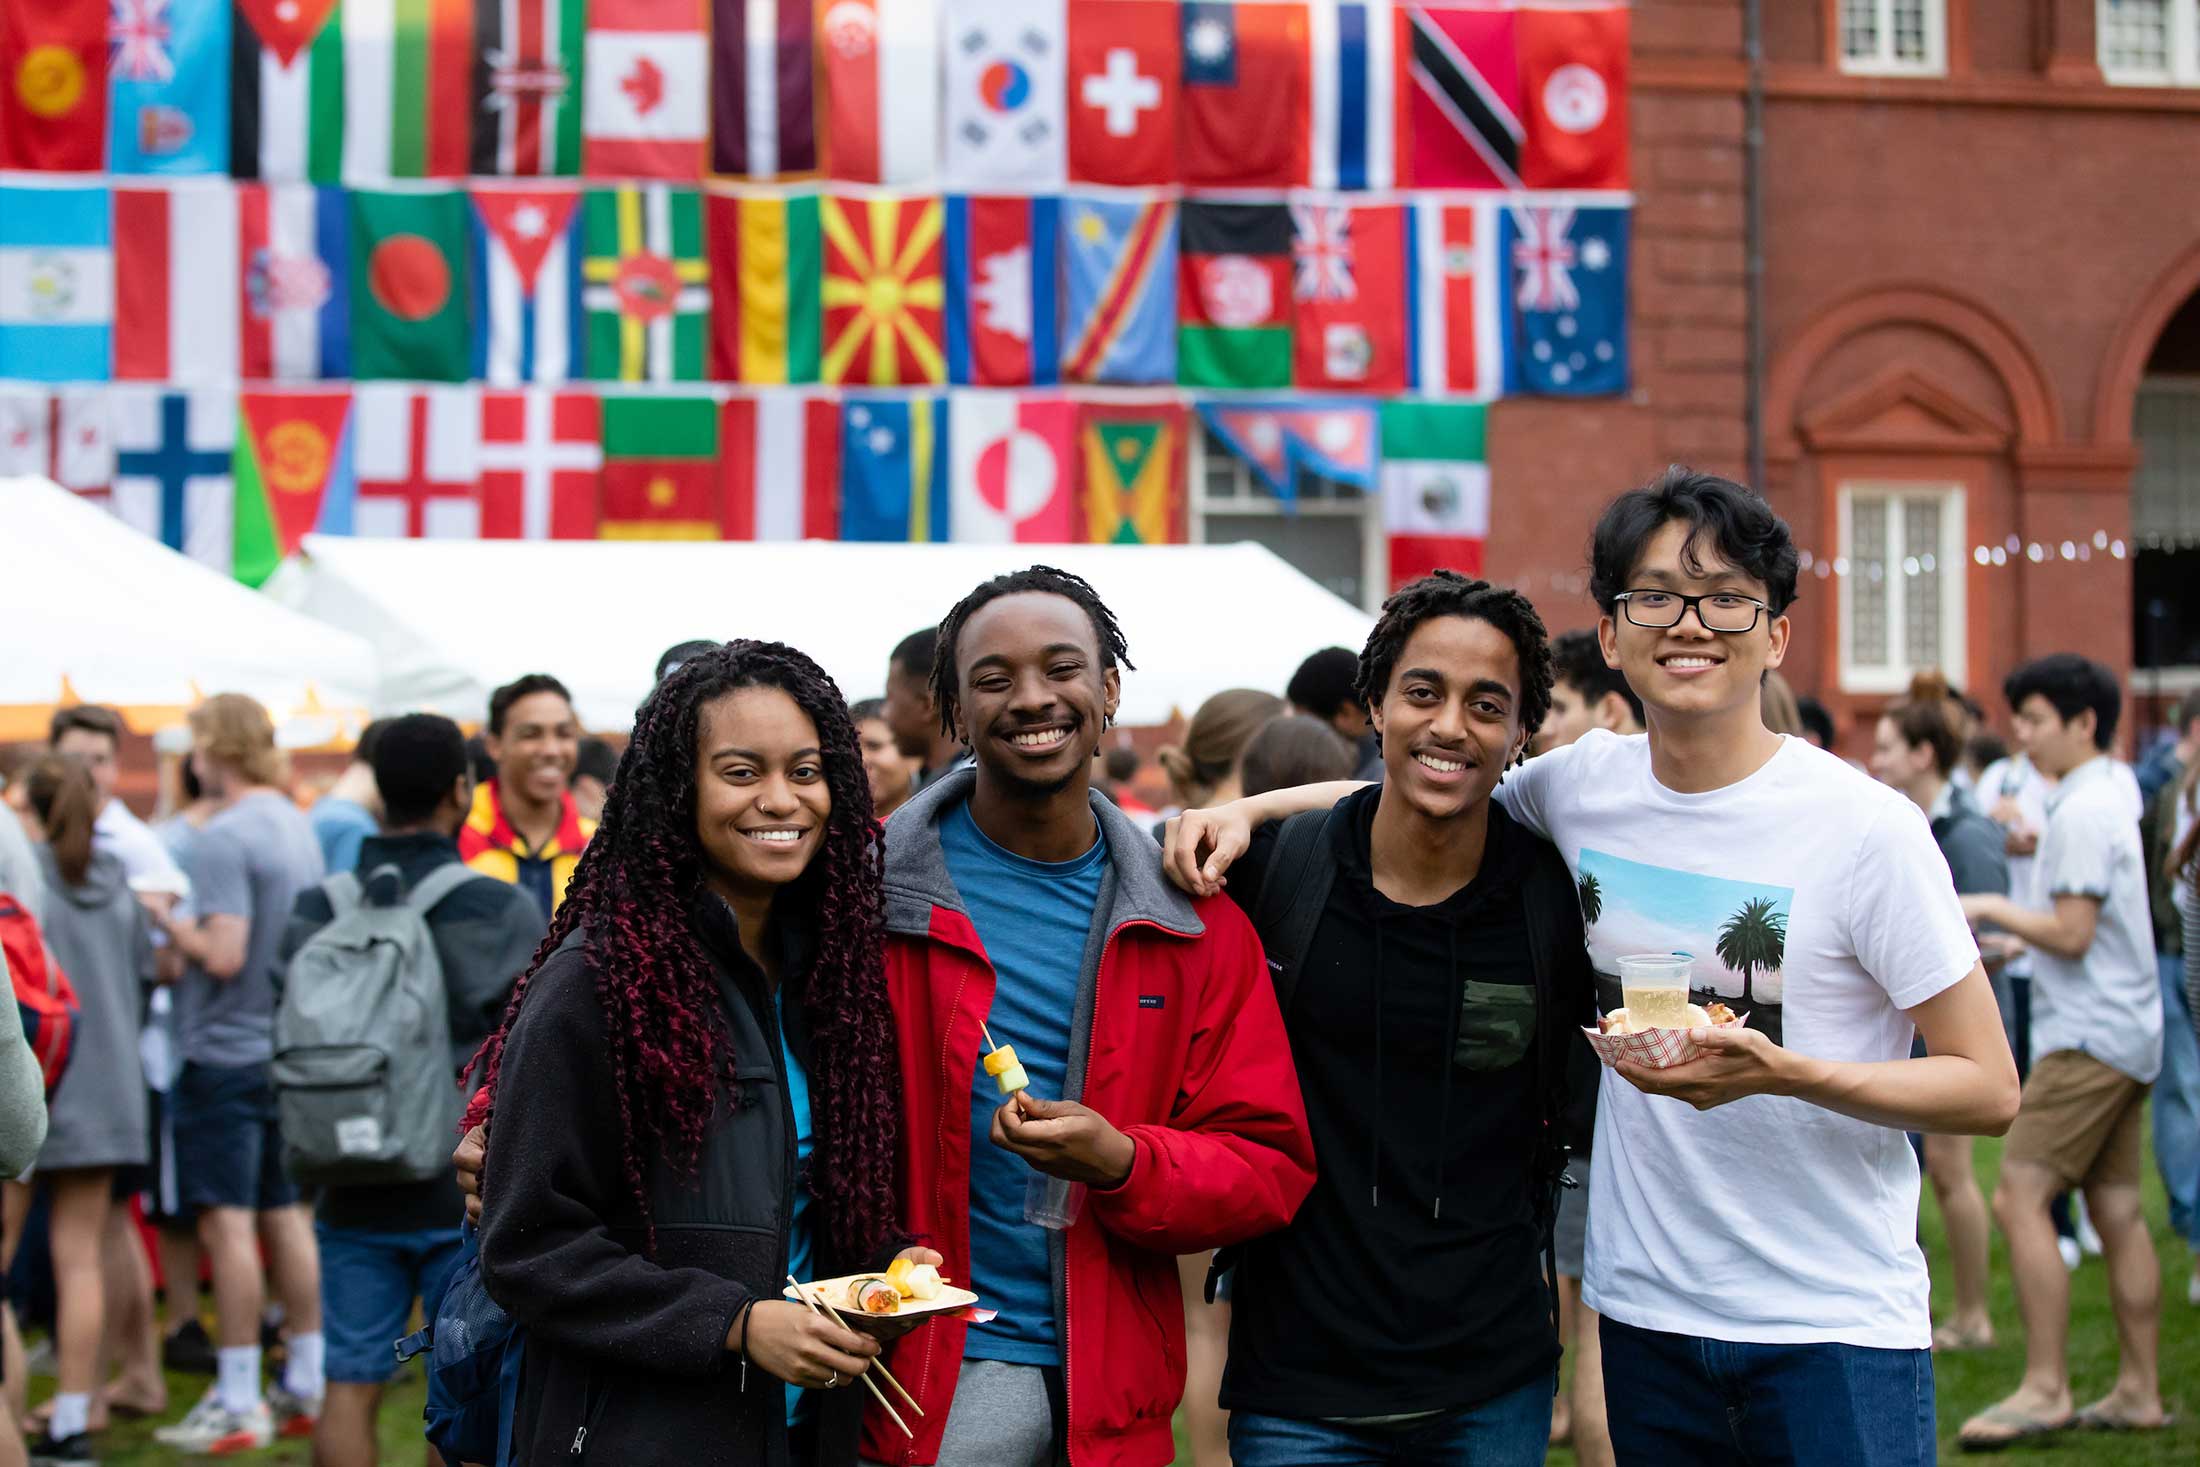 Students gather at the annual city streets festival